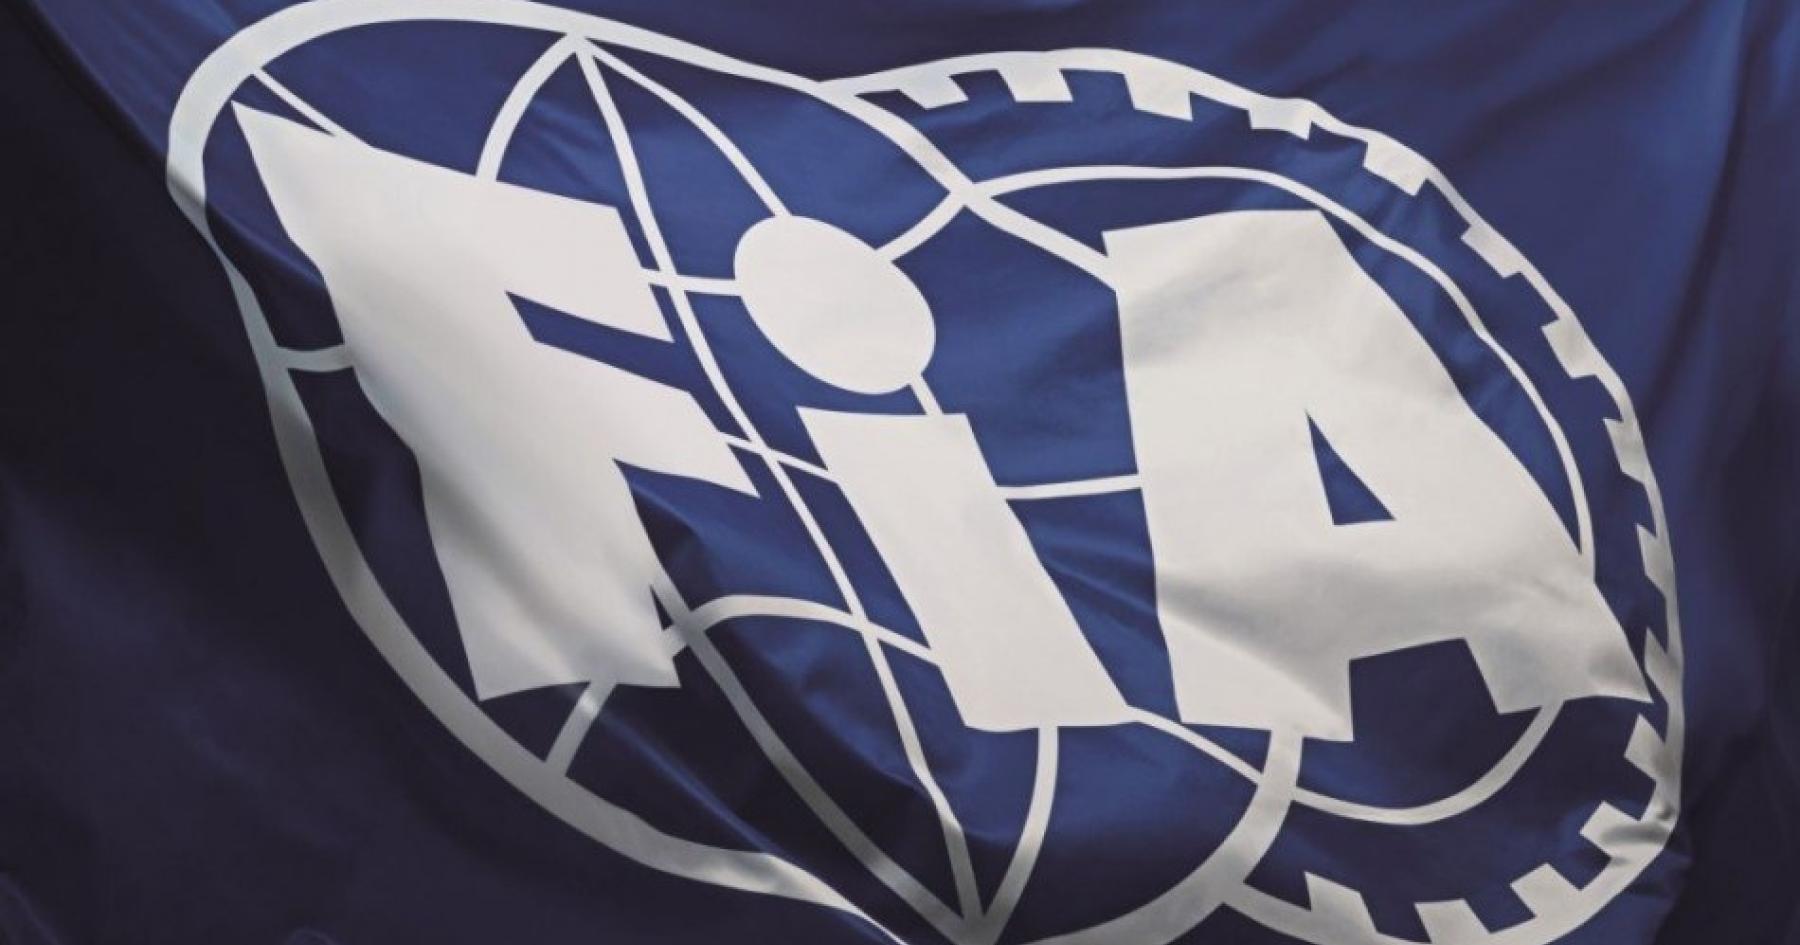 Revolutionizing the Race: FIA's Bold Move to Transform Formula 1 with Major Regulation Changes